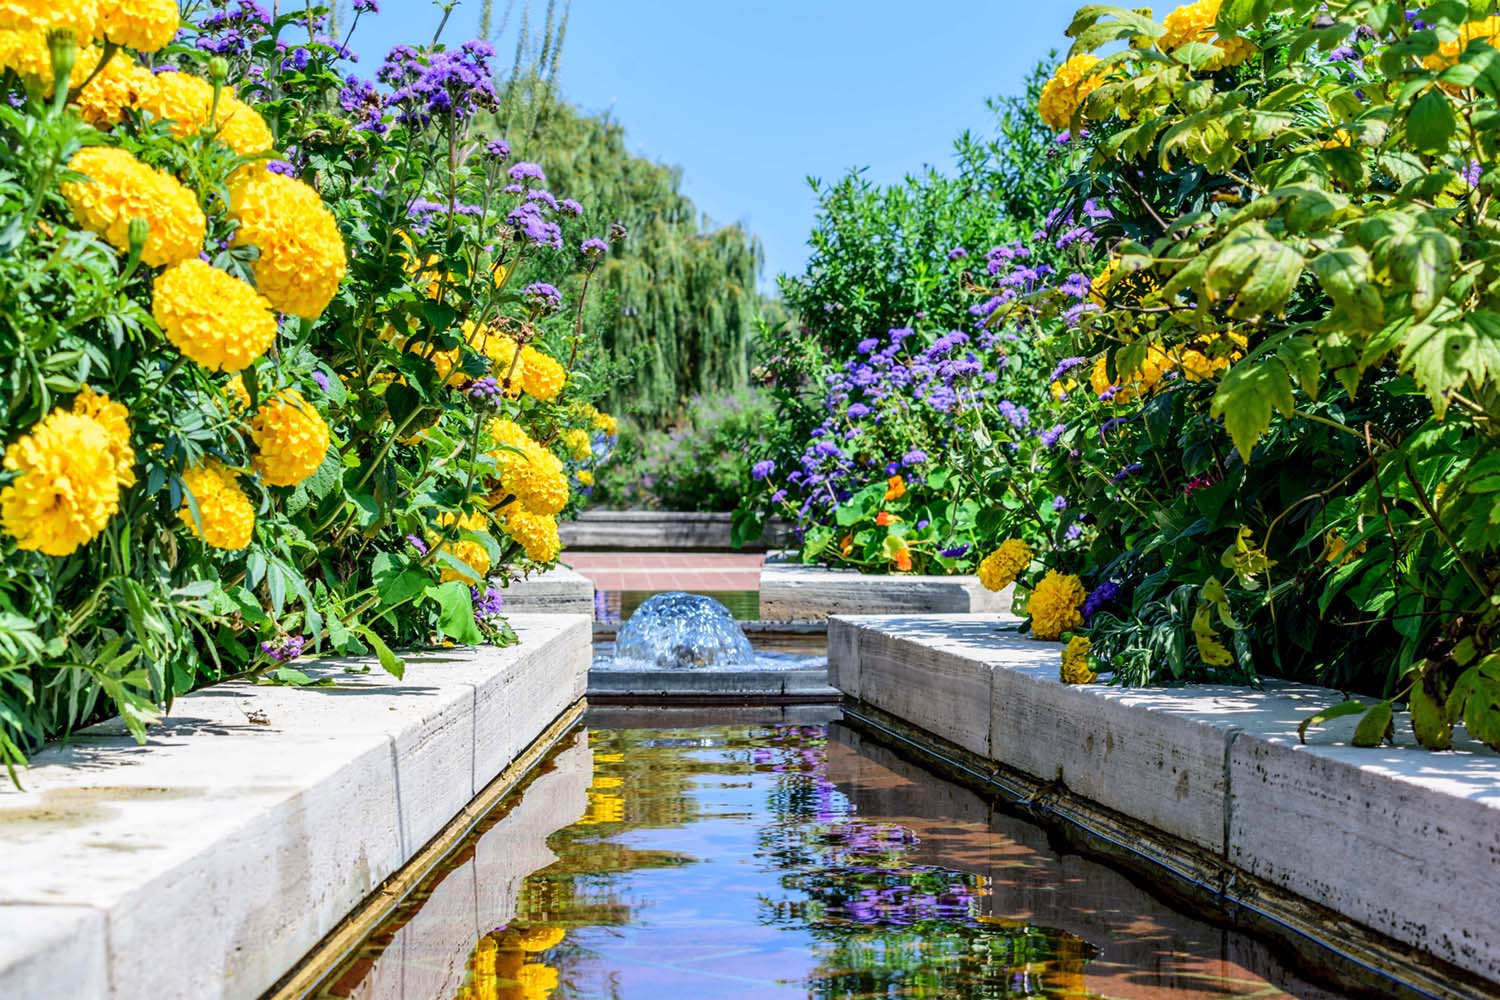 landscaping fountain with beautiful yellow and purple flowers 2022 11 07 05 22 52 utc stock photo placeholder